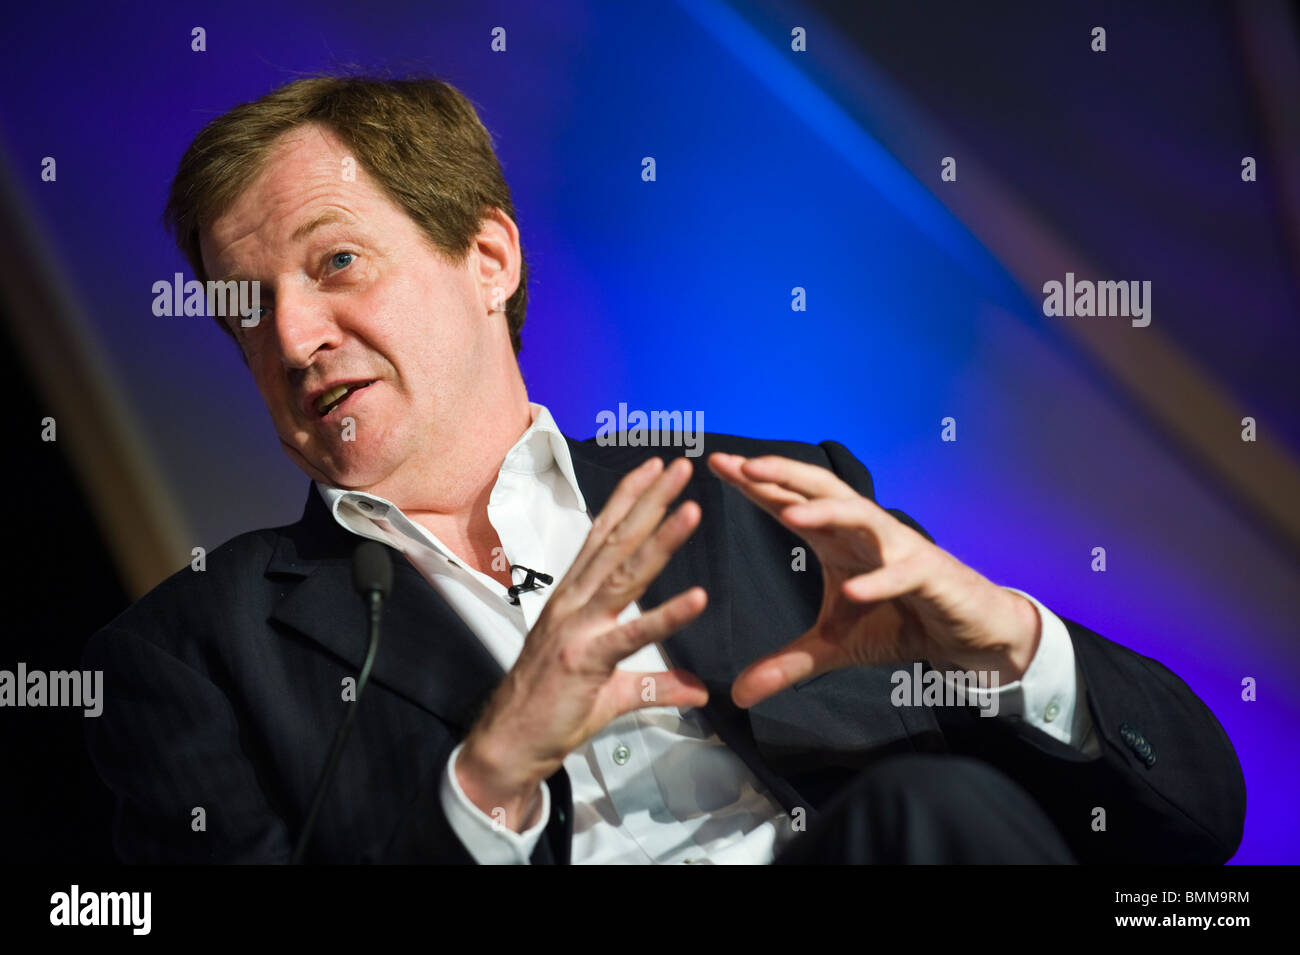 Alastair Campbell former British government spin doctor speaking on stage at Hay Festival 2010 Hay on Wye Powys Wales UK Stock Photo